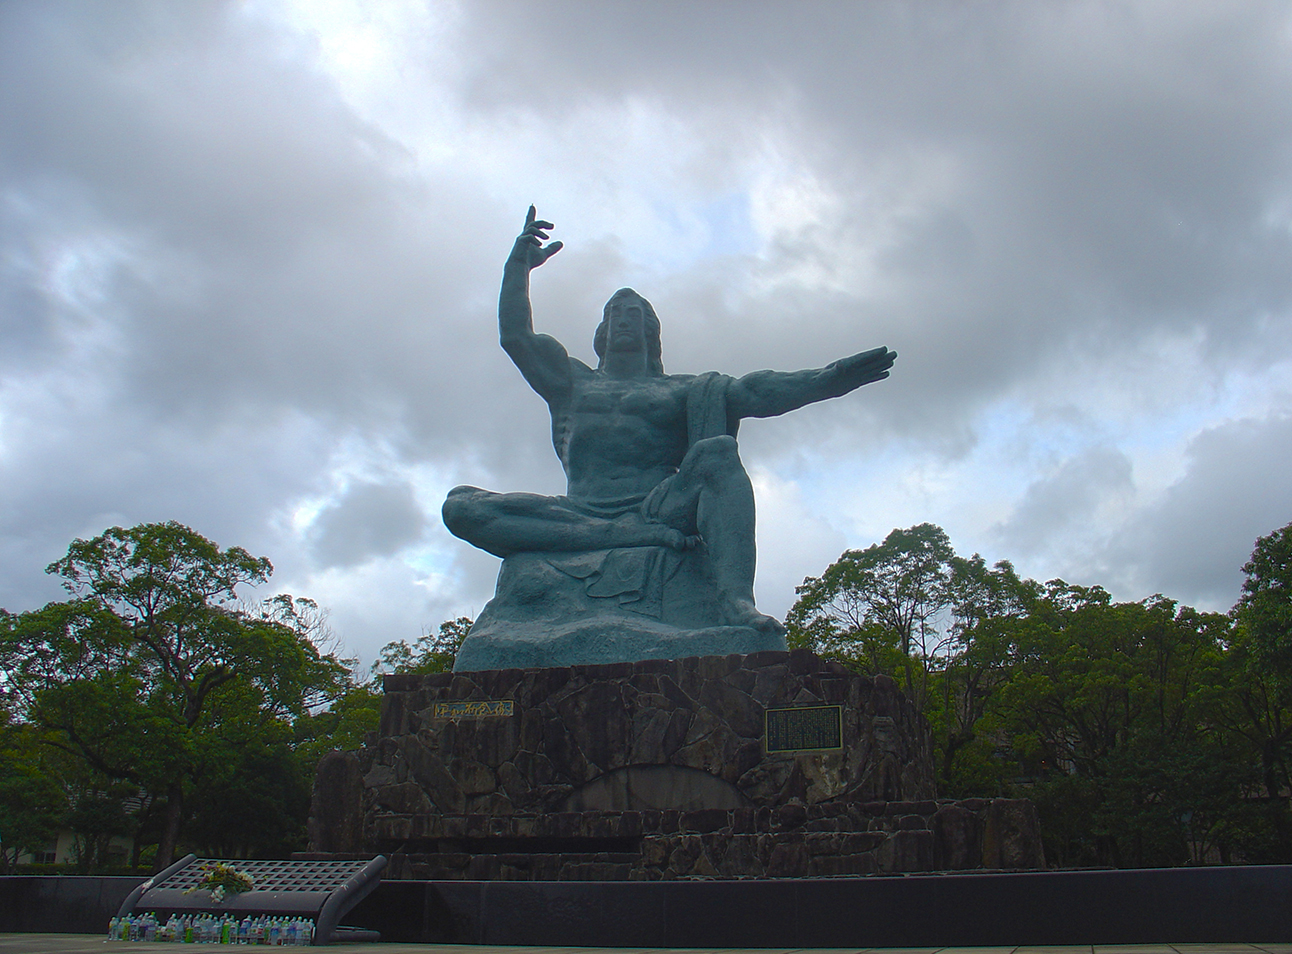 The right hand points to the sky, where the atomic bomb exploded; the left hand points towards peace.